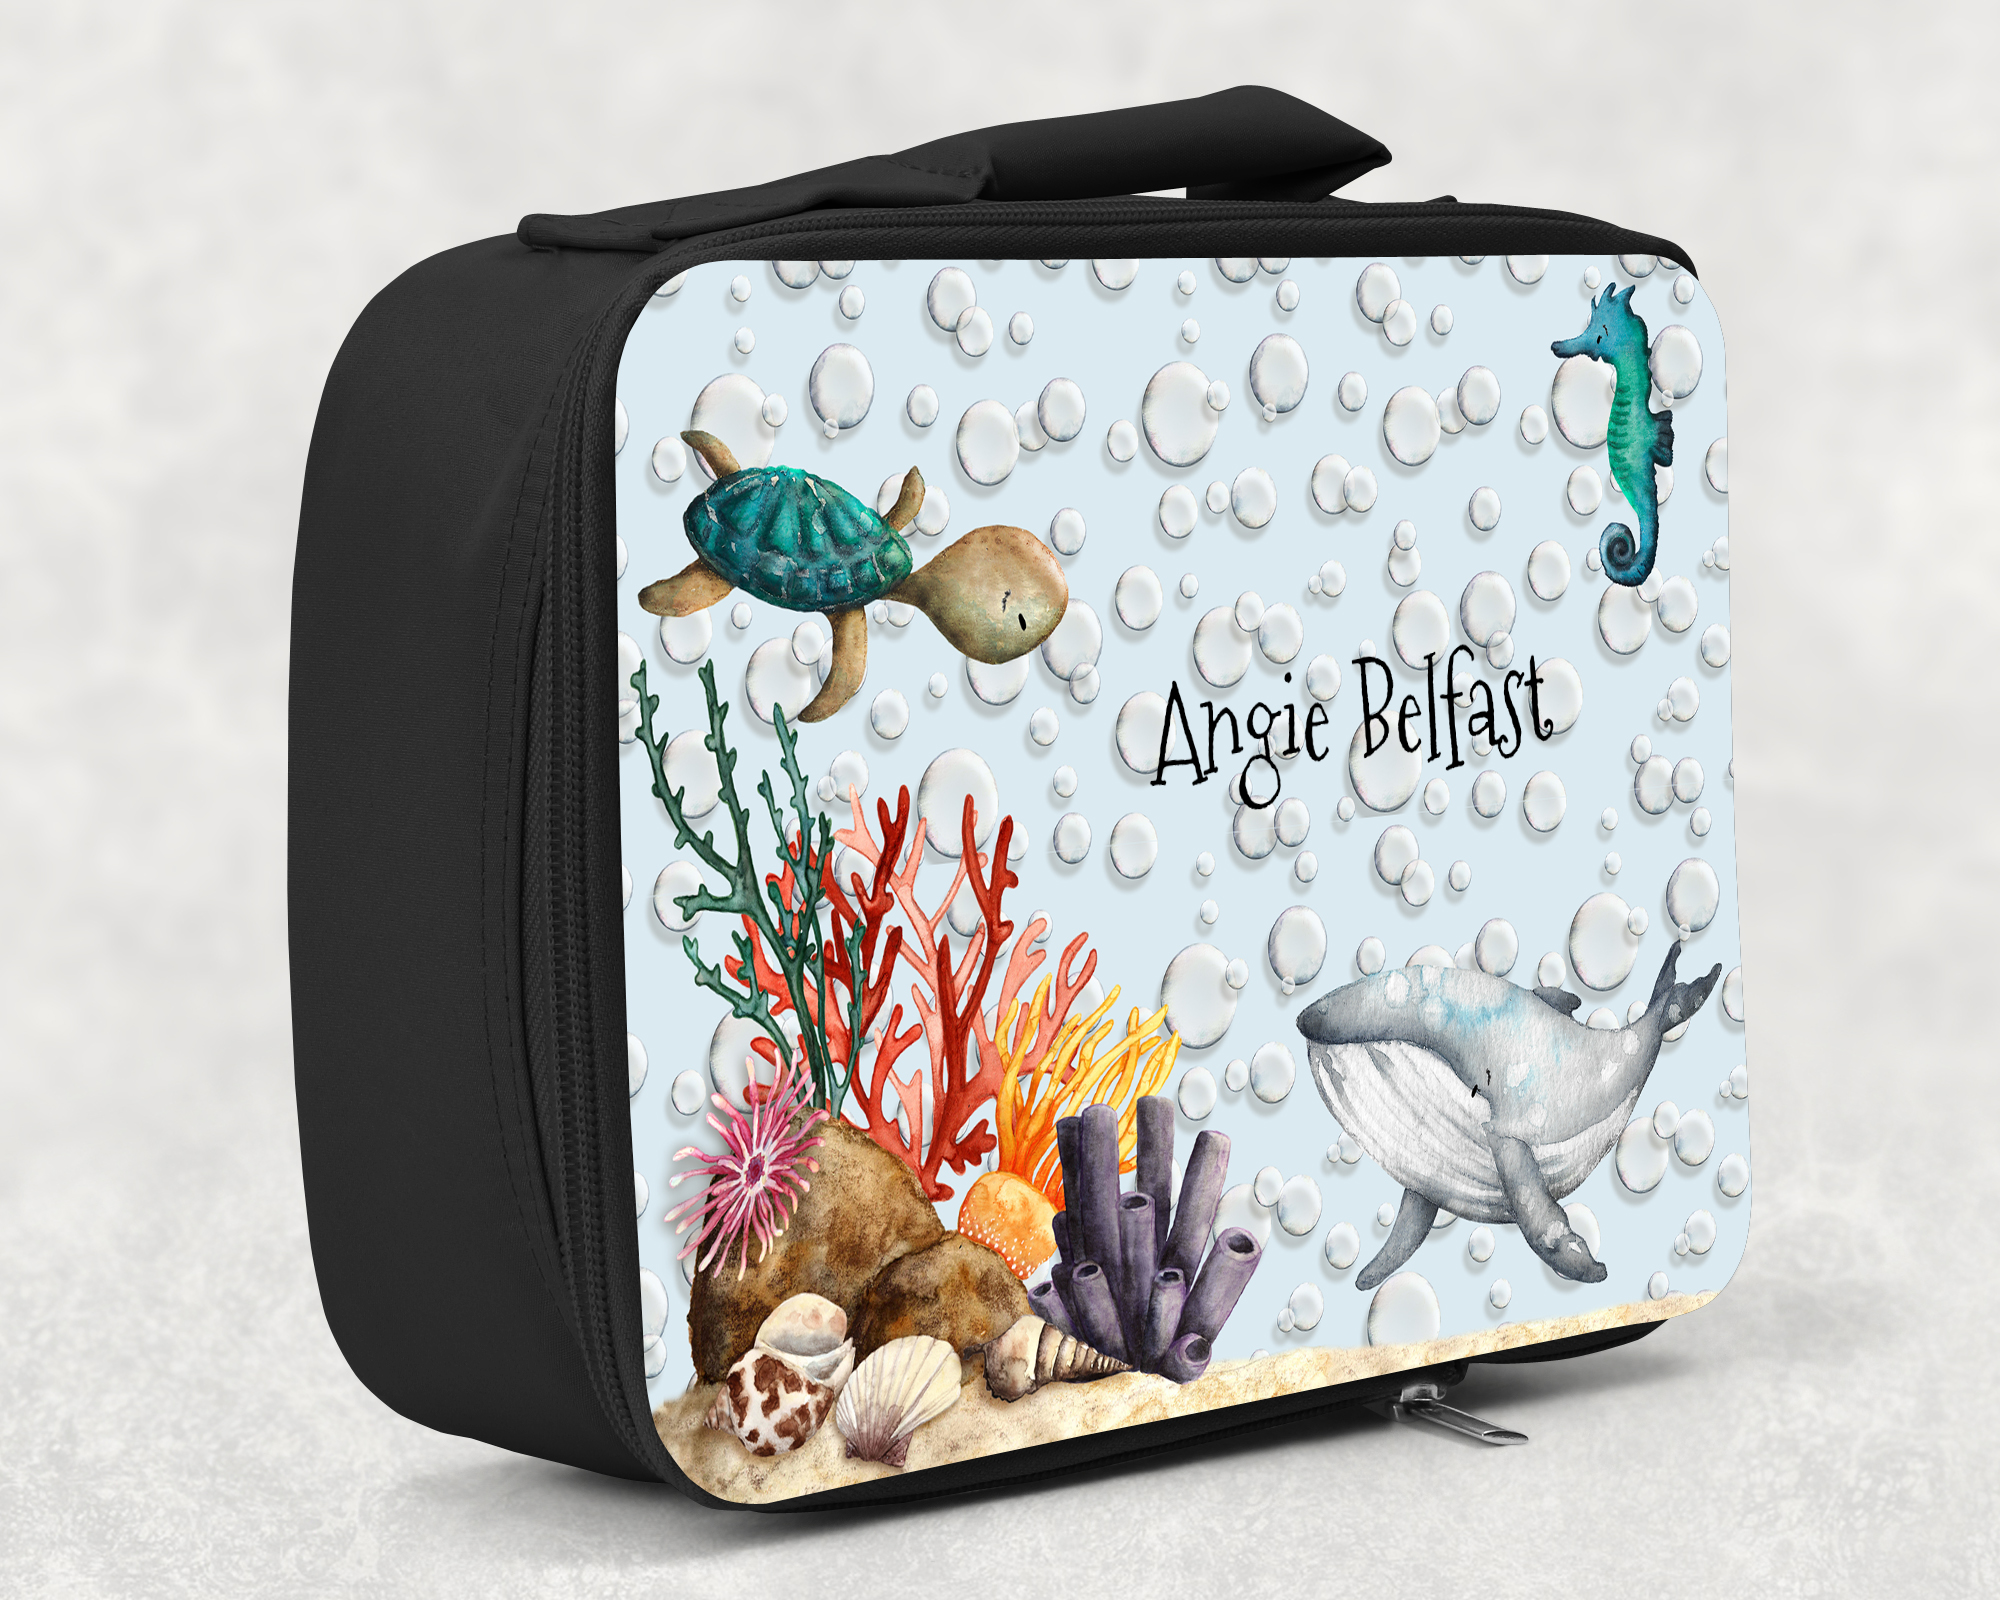 children's insulated lunch bag with bright colourful personalised printed design in under the sea turtle and fish theme